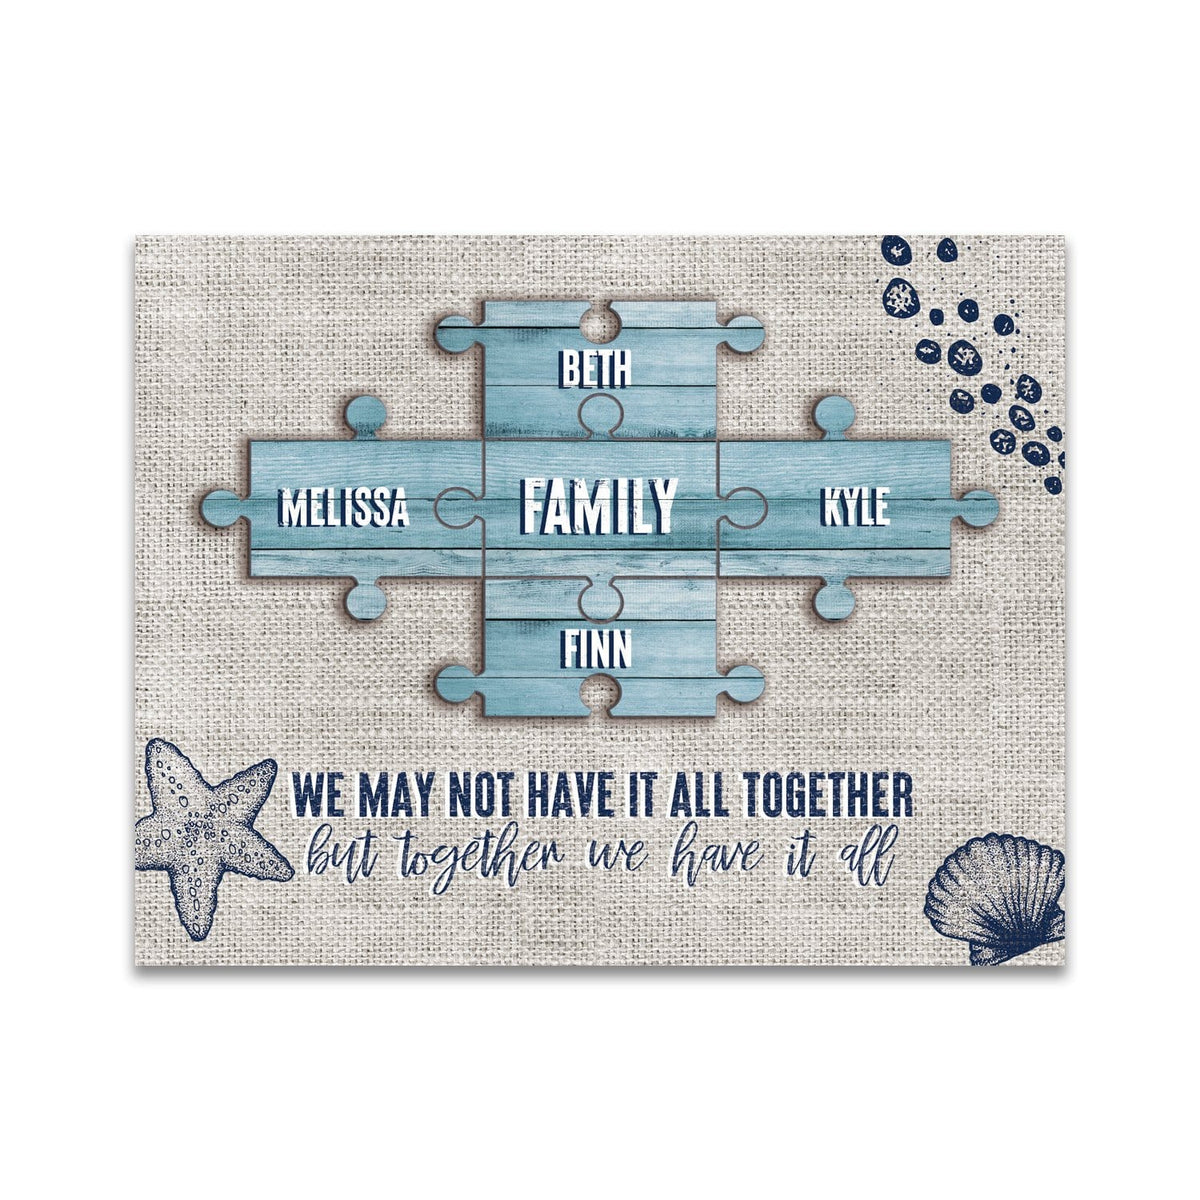 Personalized beach decor for your family. Quote reads &quot;We may not have it all together, but together we have it all&quot;. 